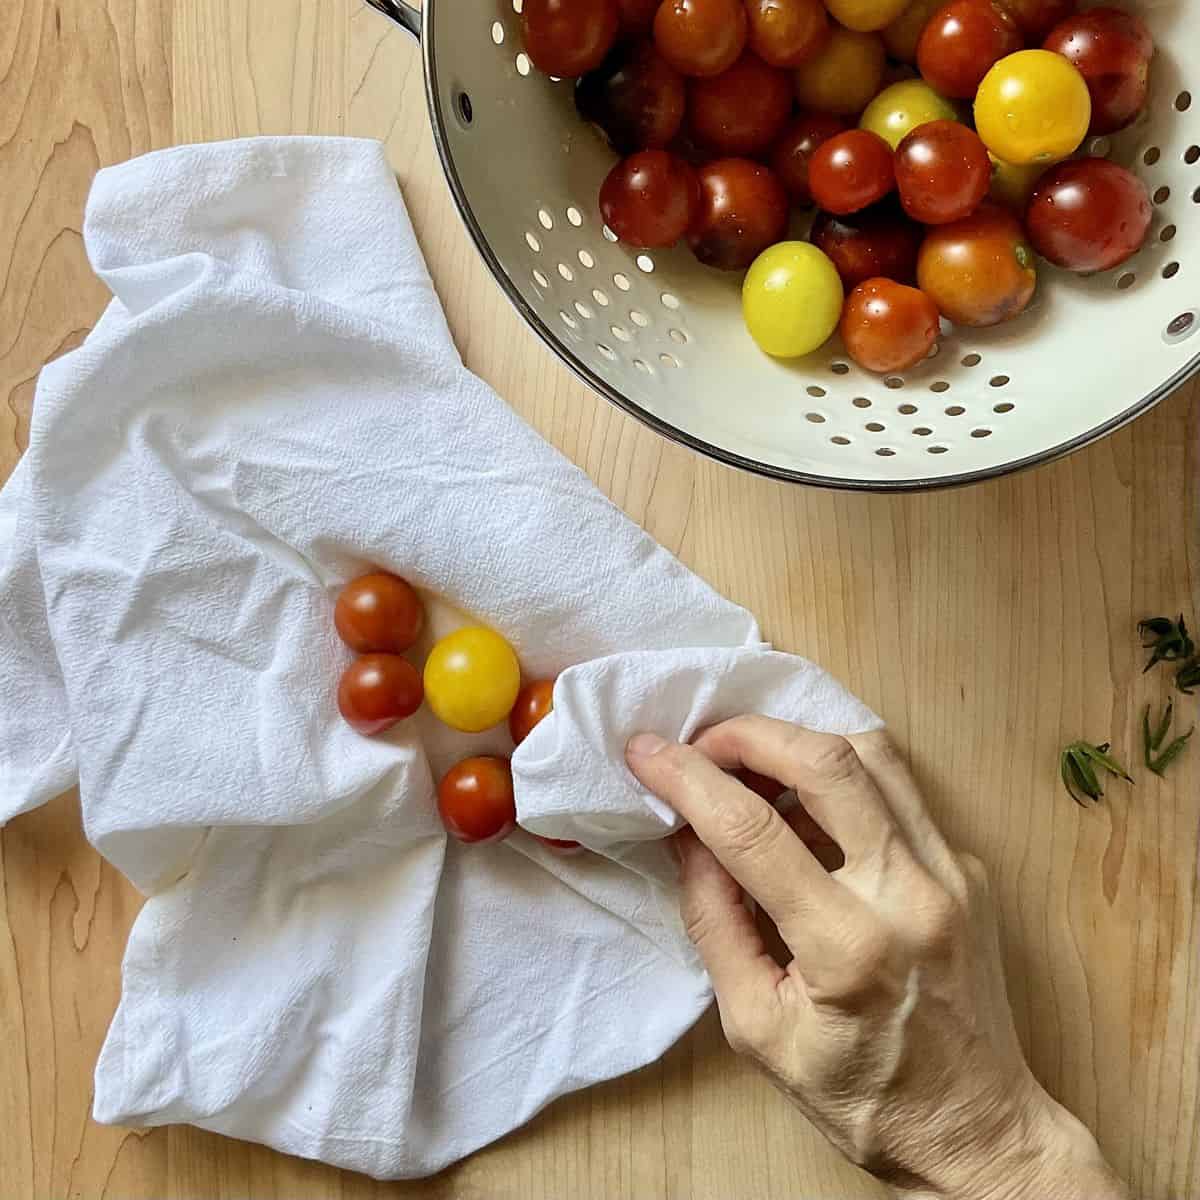 Cherry tomatoes in the process of being fried with a tea towel.